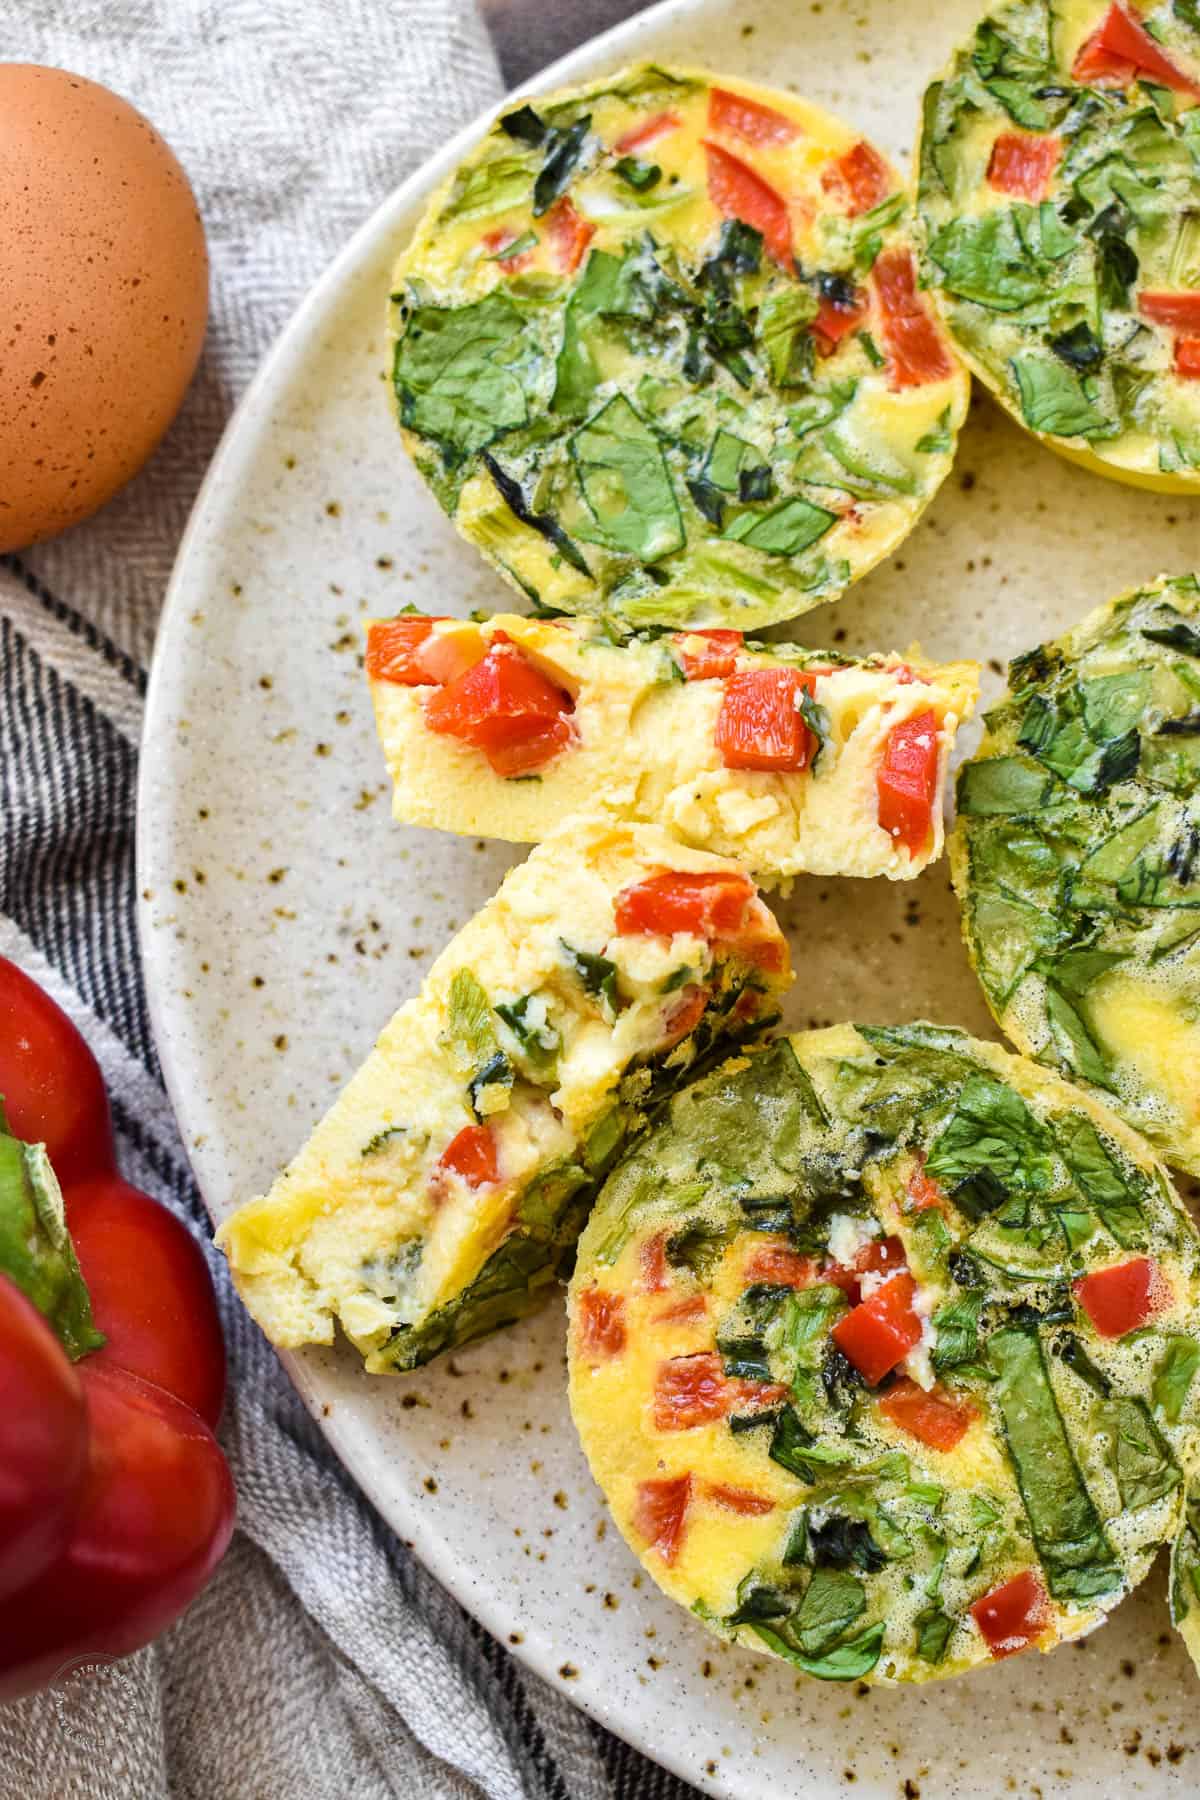 Round yellow egg bites full of spinach and diced bell pepper with one cut in half to show the velvety interior